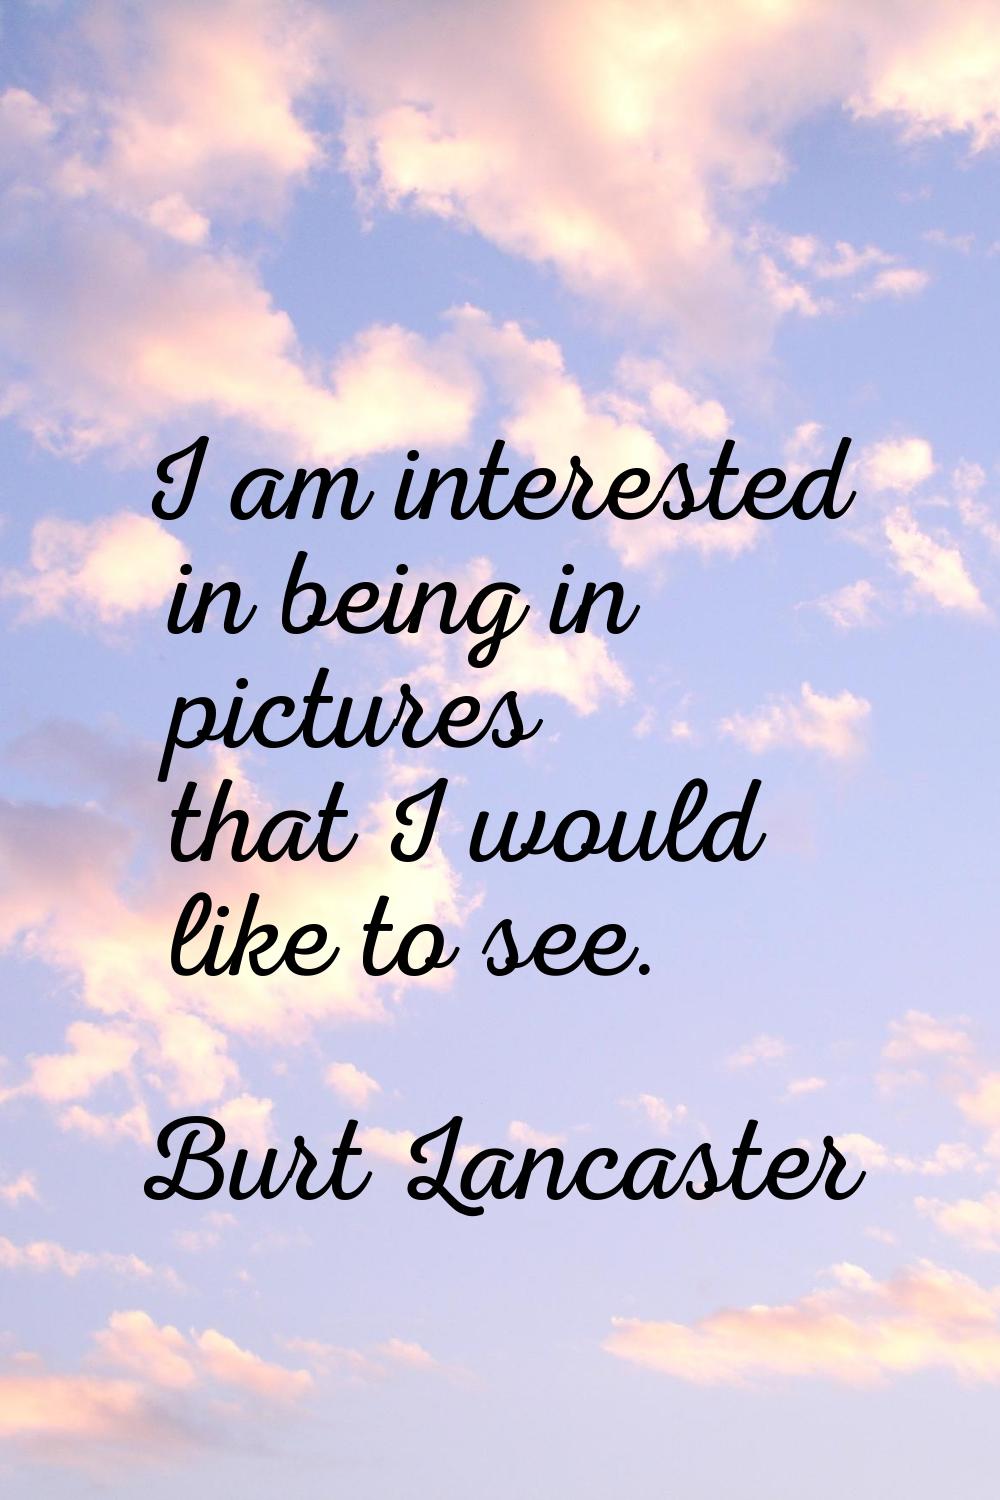 I am interested in being in pictures that I would like to see.